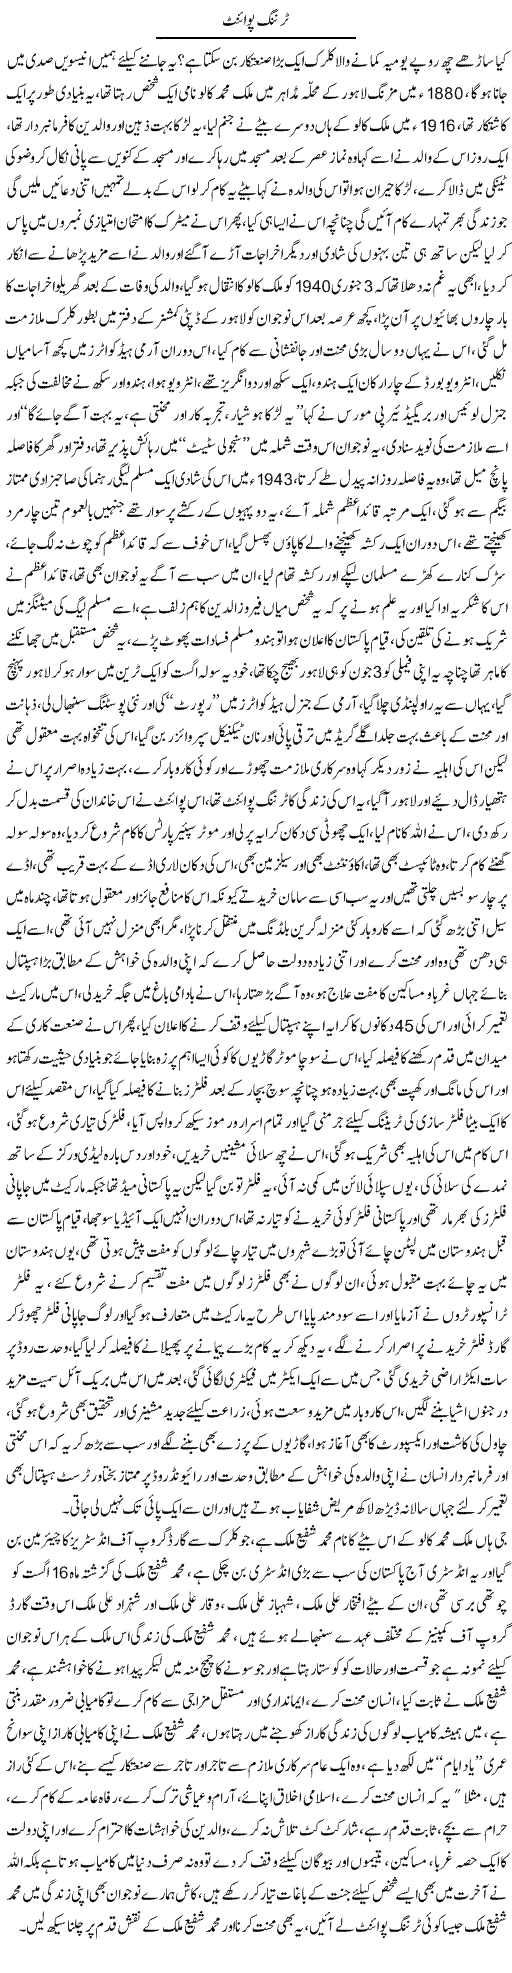 Becoming Rich Express Column Amad Chaudhry 4 September 2011